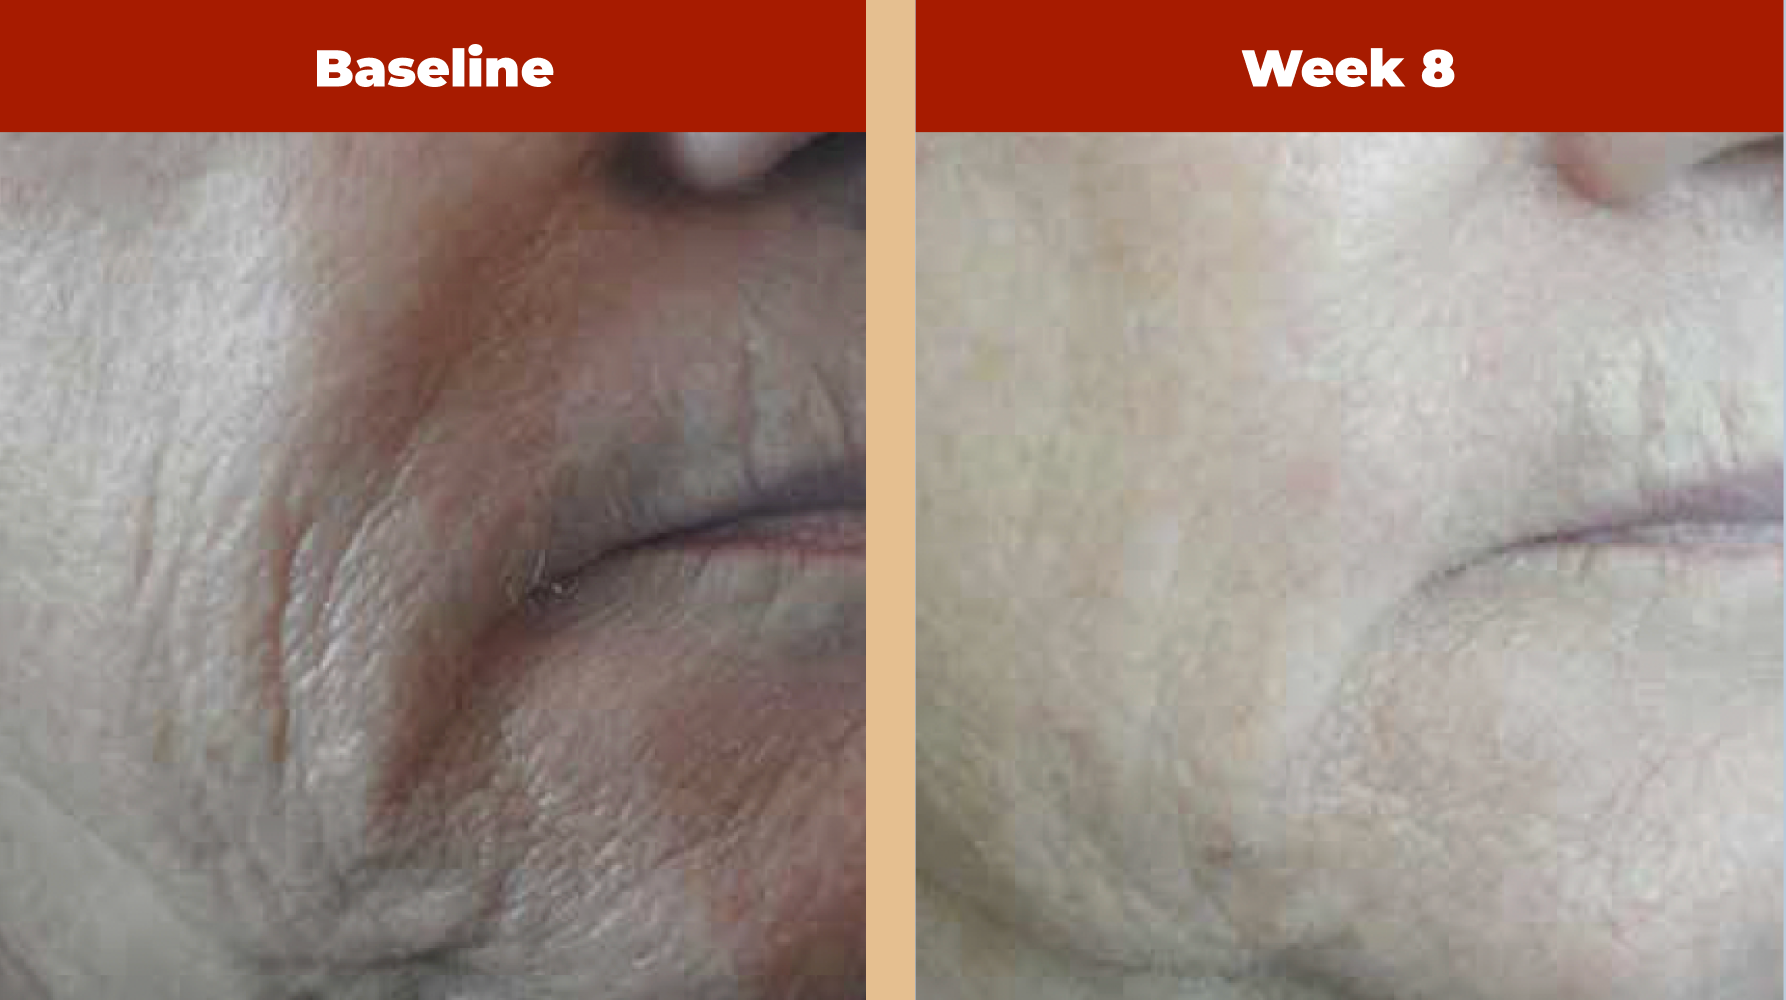 Unretouched photographs of patient at baseline and after daily evening use of Retriderm Max 1%. Photographs courtesy of Vivian Bucay, MD.